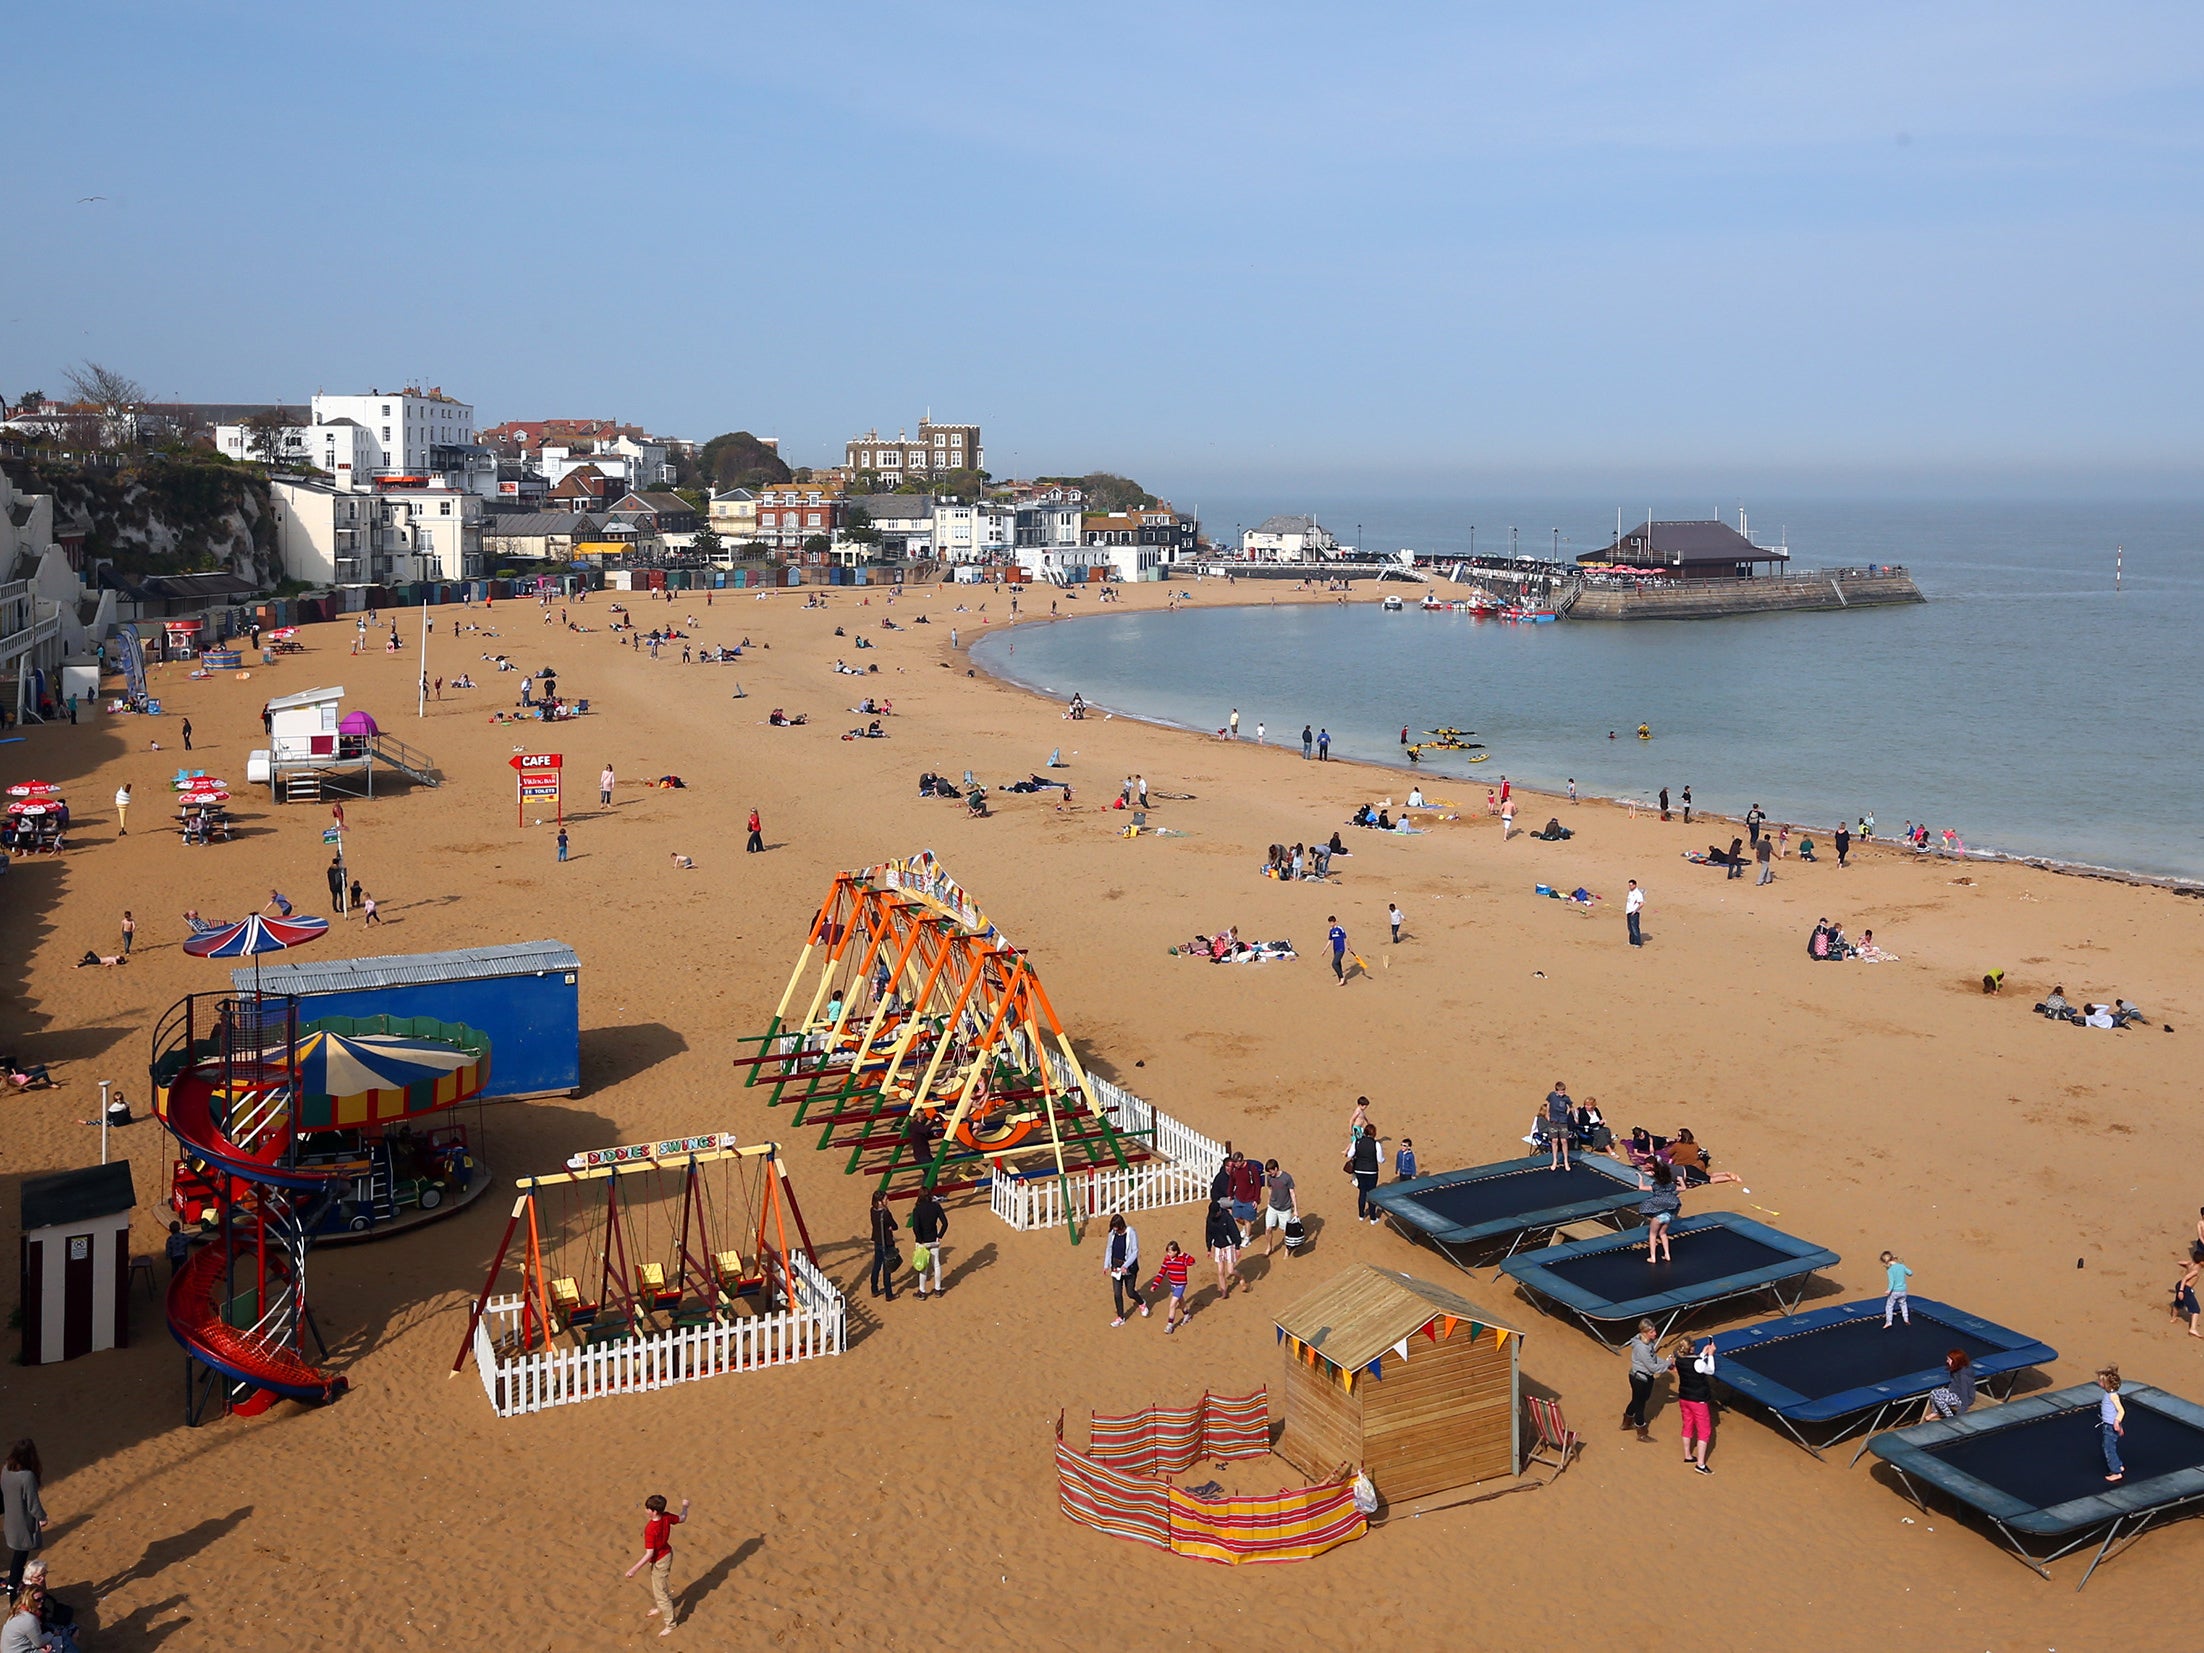 Officials warn refugees are increasingly arriving in Britain via the country's vast coastline, such as here at the beach town of Broadstairs in Kent